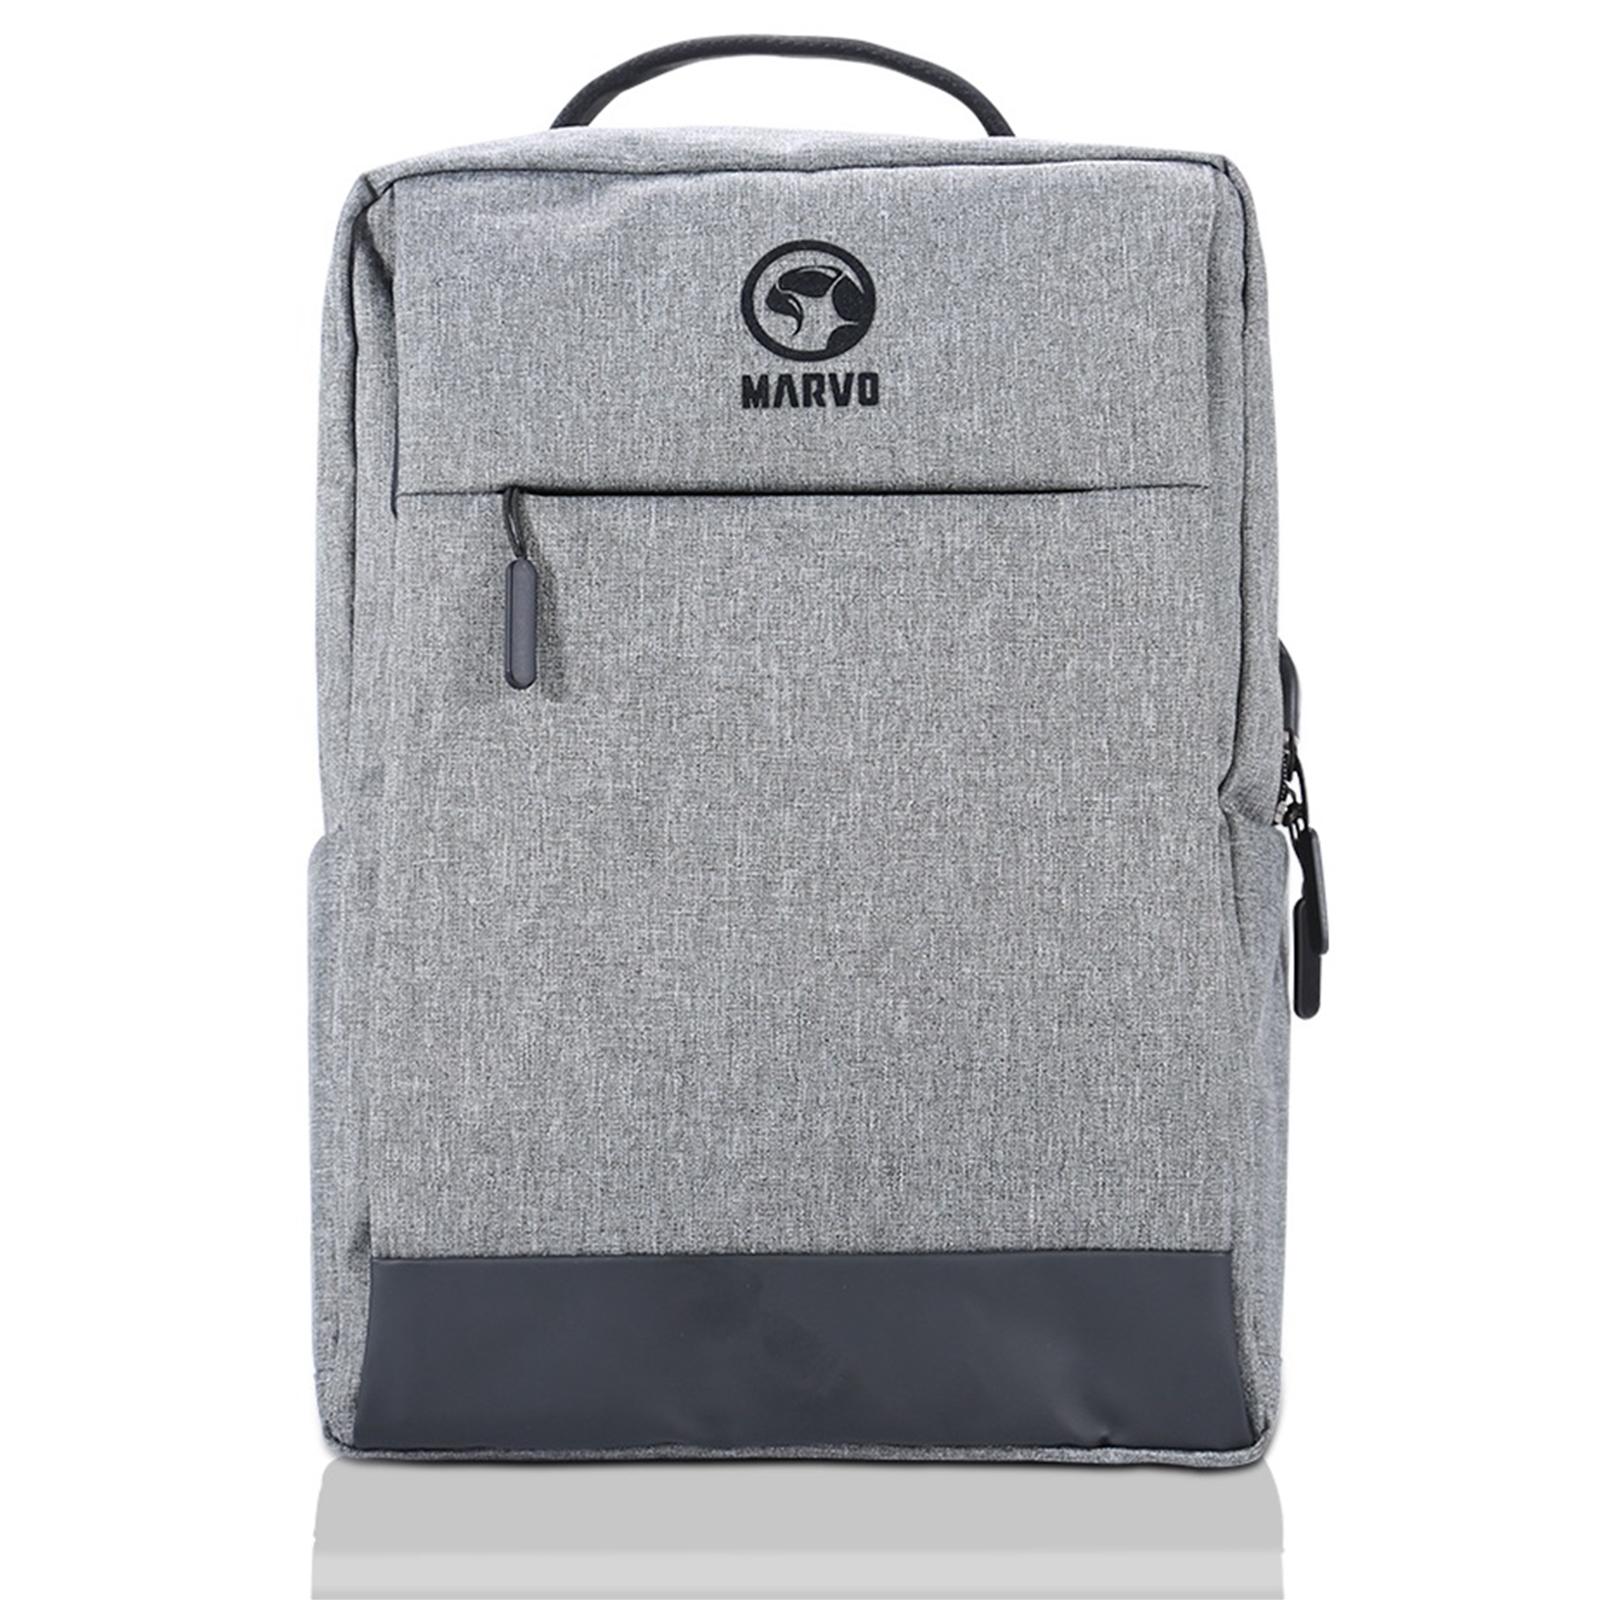 Marvo Laptop 15.6 inch Backpack with USB Charging Port, Waterproof Durable Fabric, Max Load 20kg, Grey with Black Detail